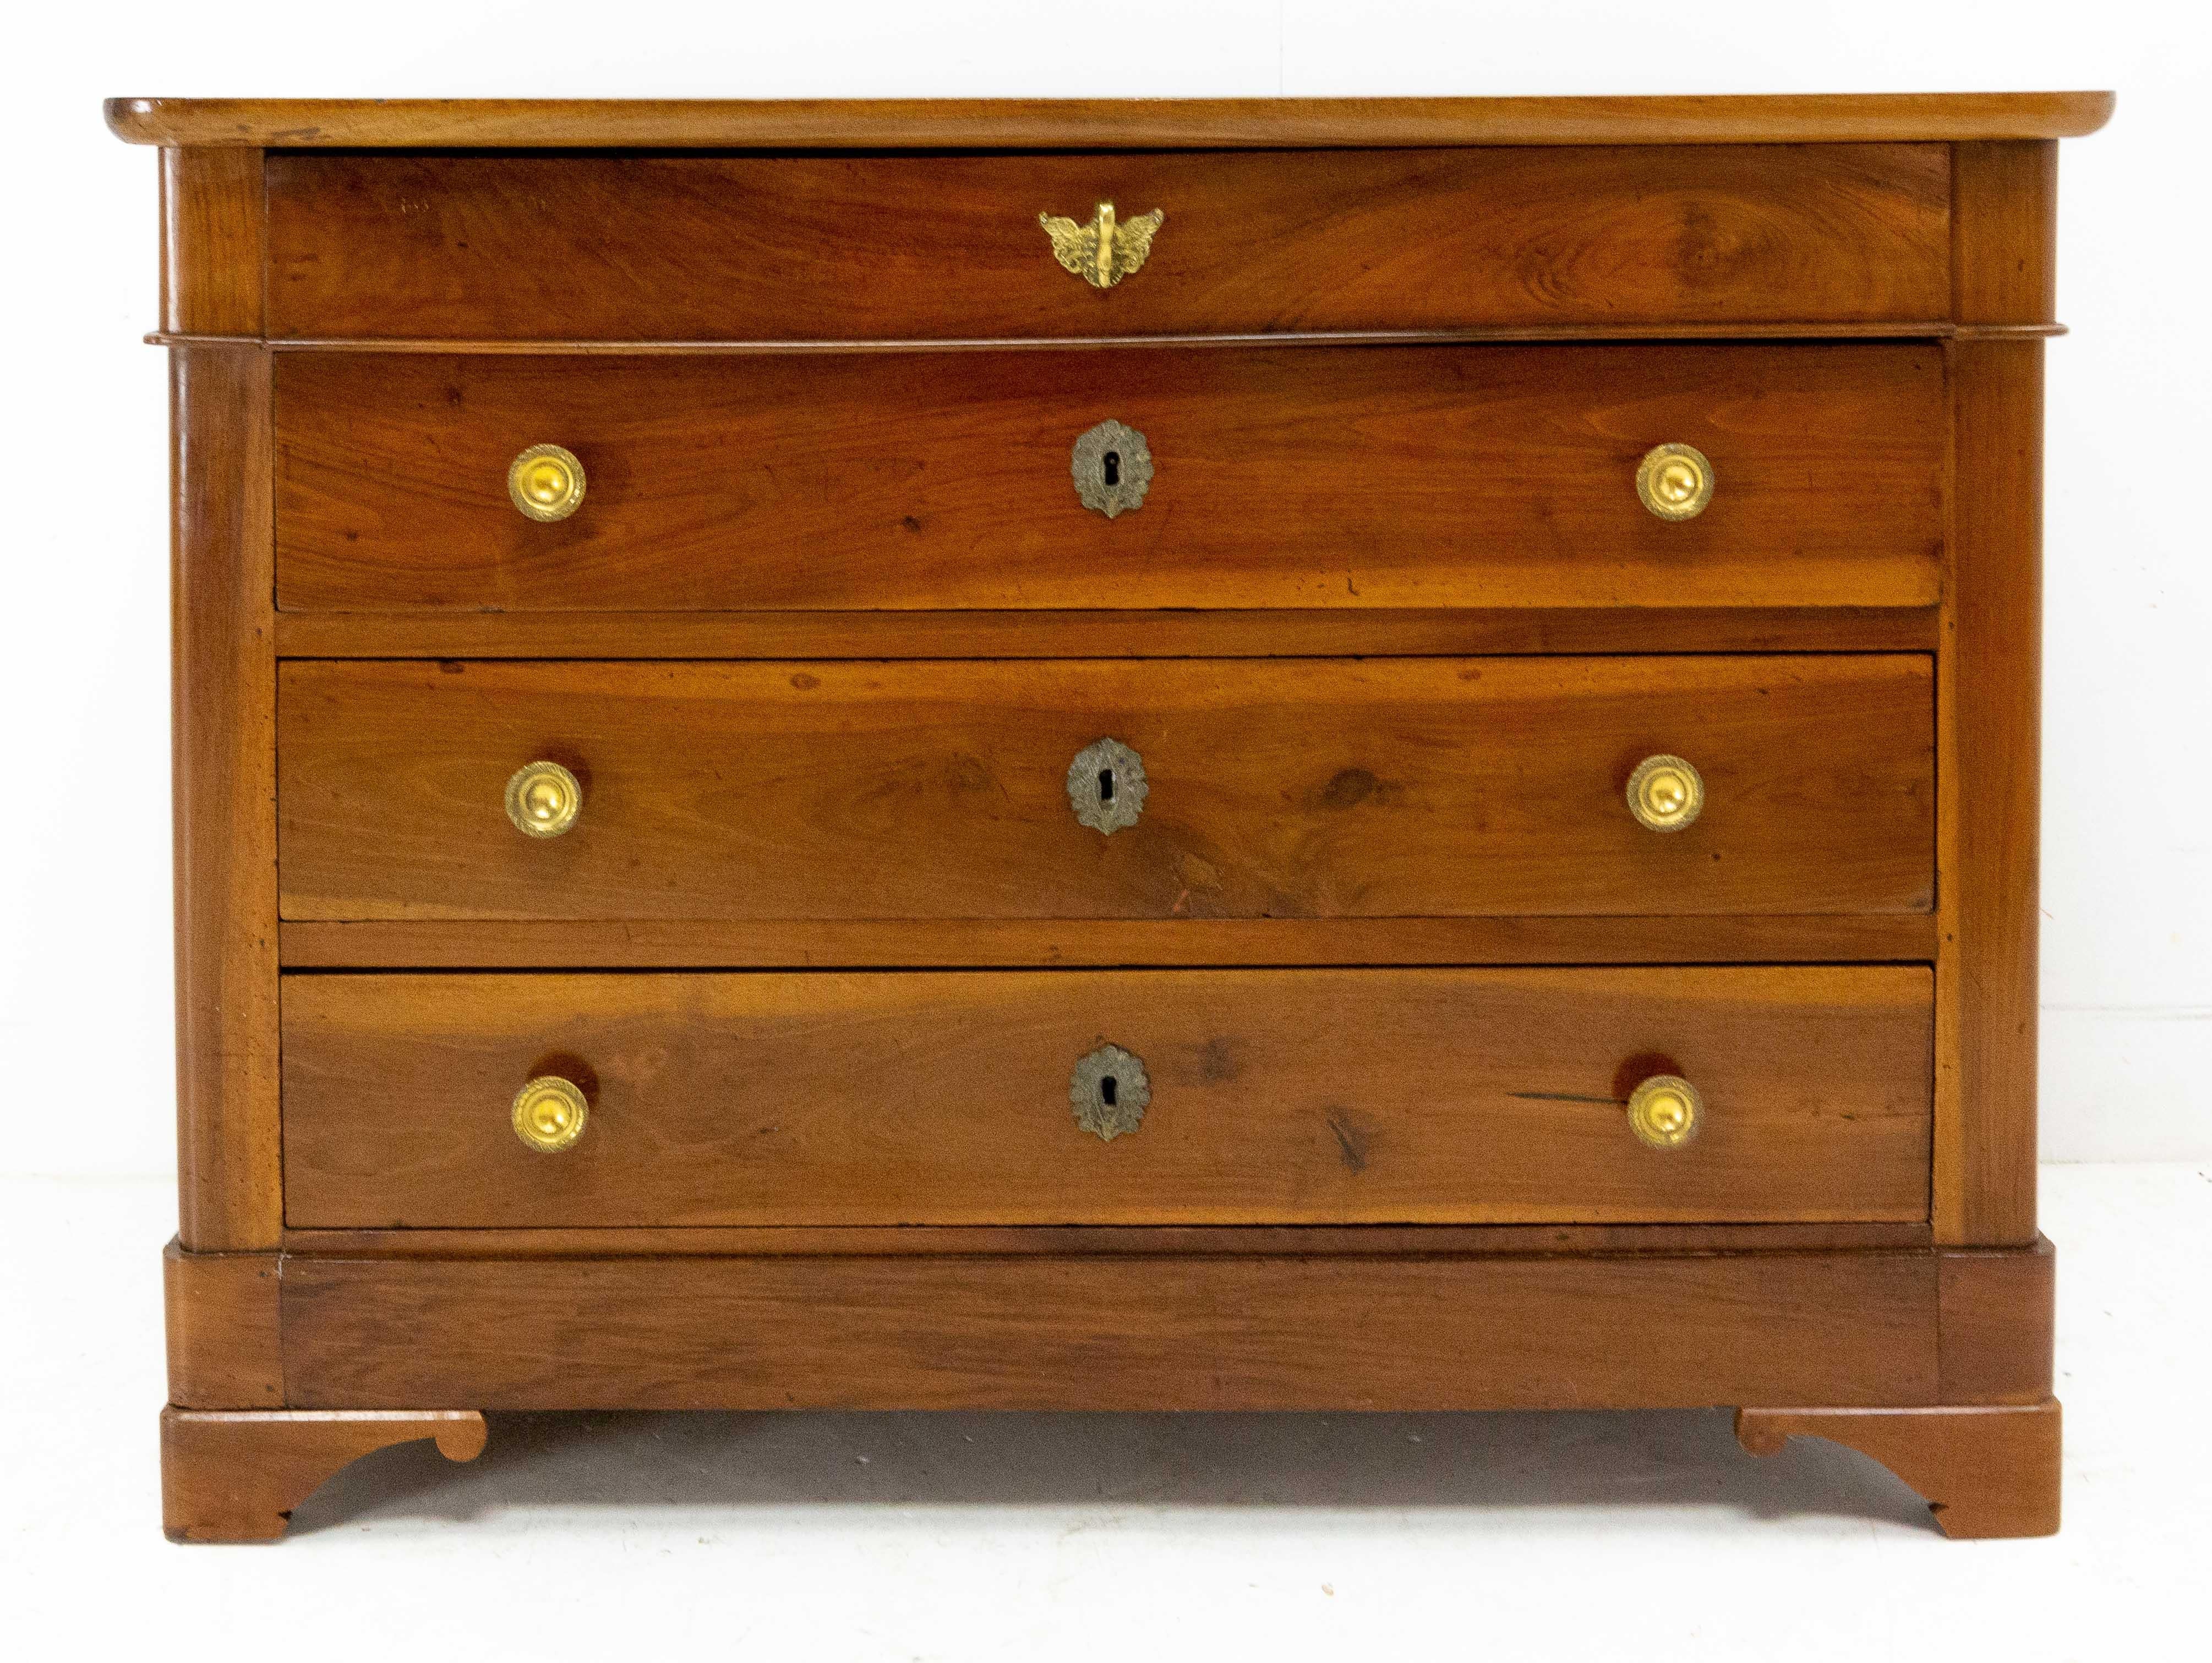 French commode chest of drawers early 19th century Empire style
Four large drawers, on the first one an elegant brass swan acts as a drawer knob.
On the locks bouquets of flowers are carved.
Good antique condition, with minor signs of age and